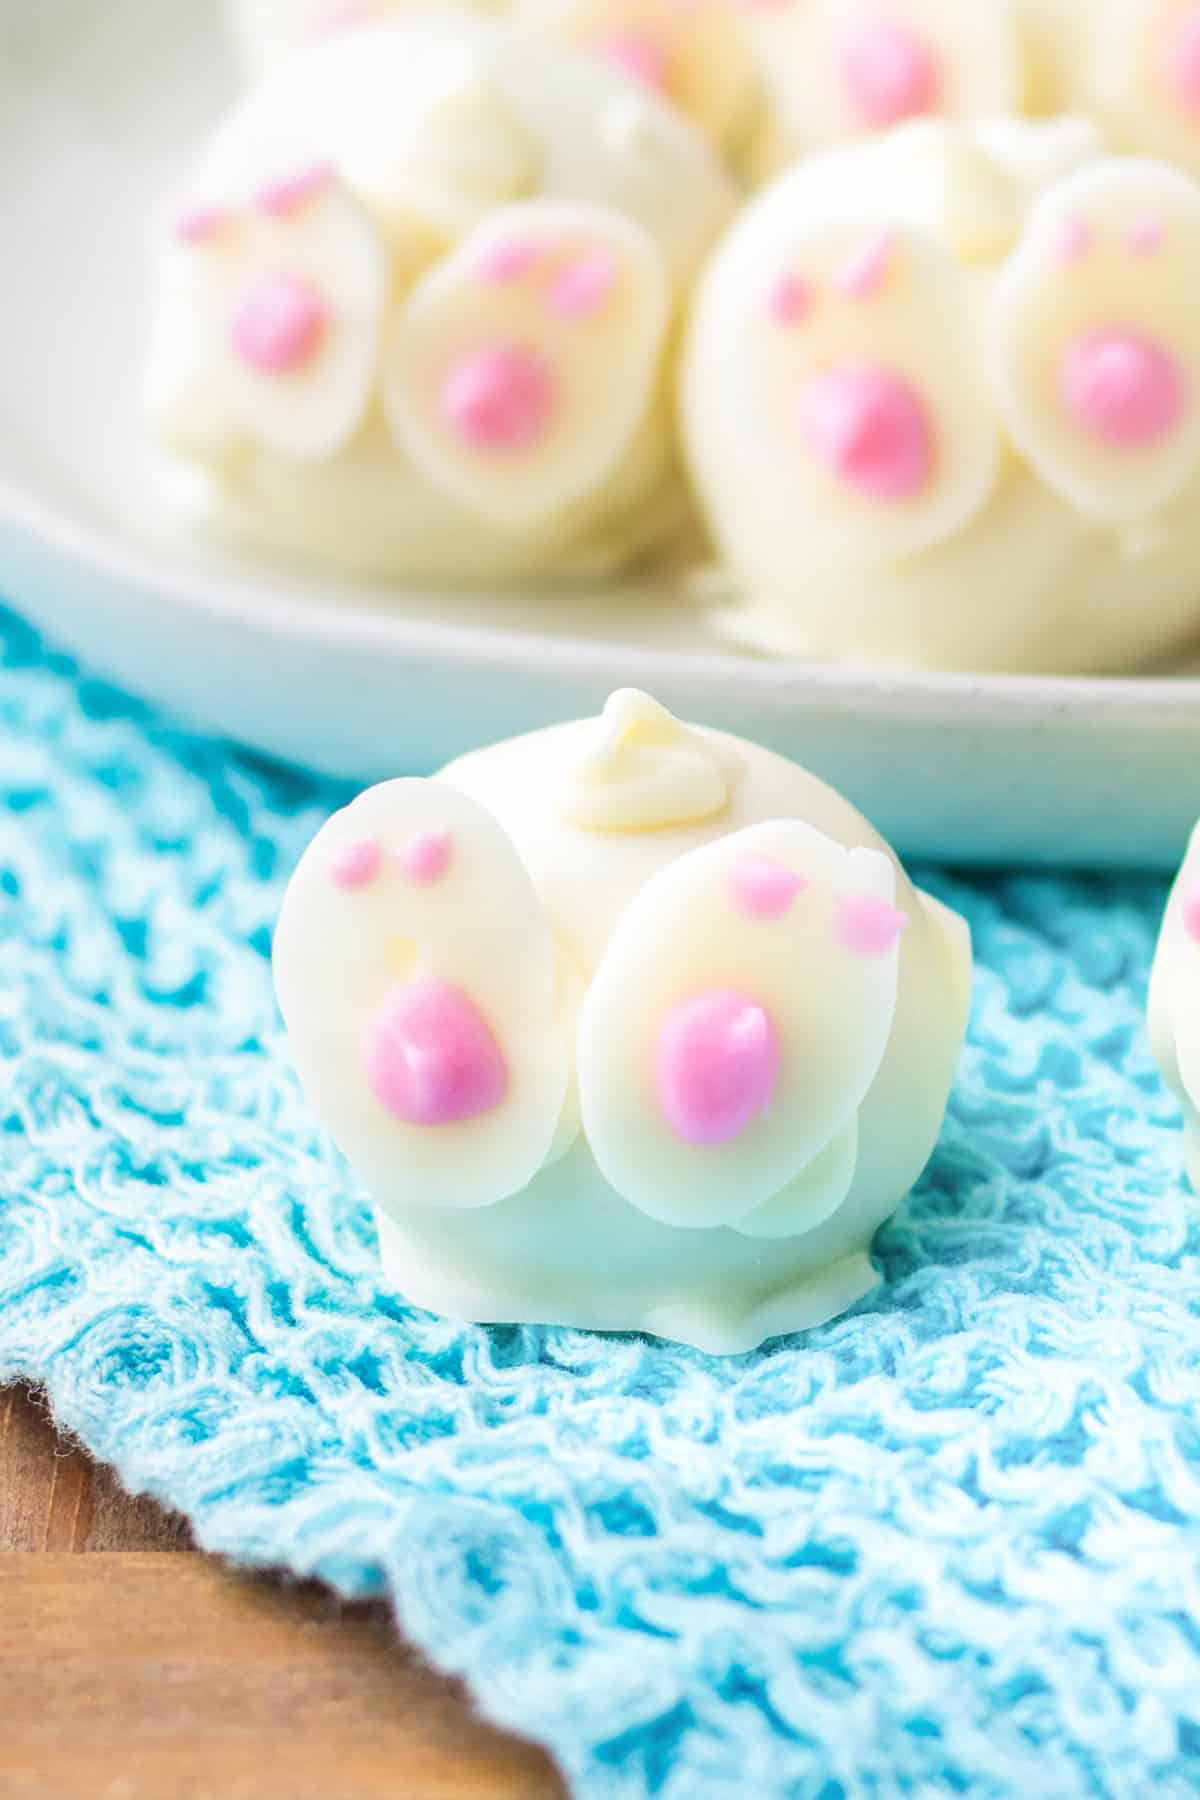 Easter bunny white chocolate truffle with pink details on feet.